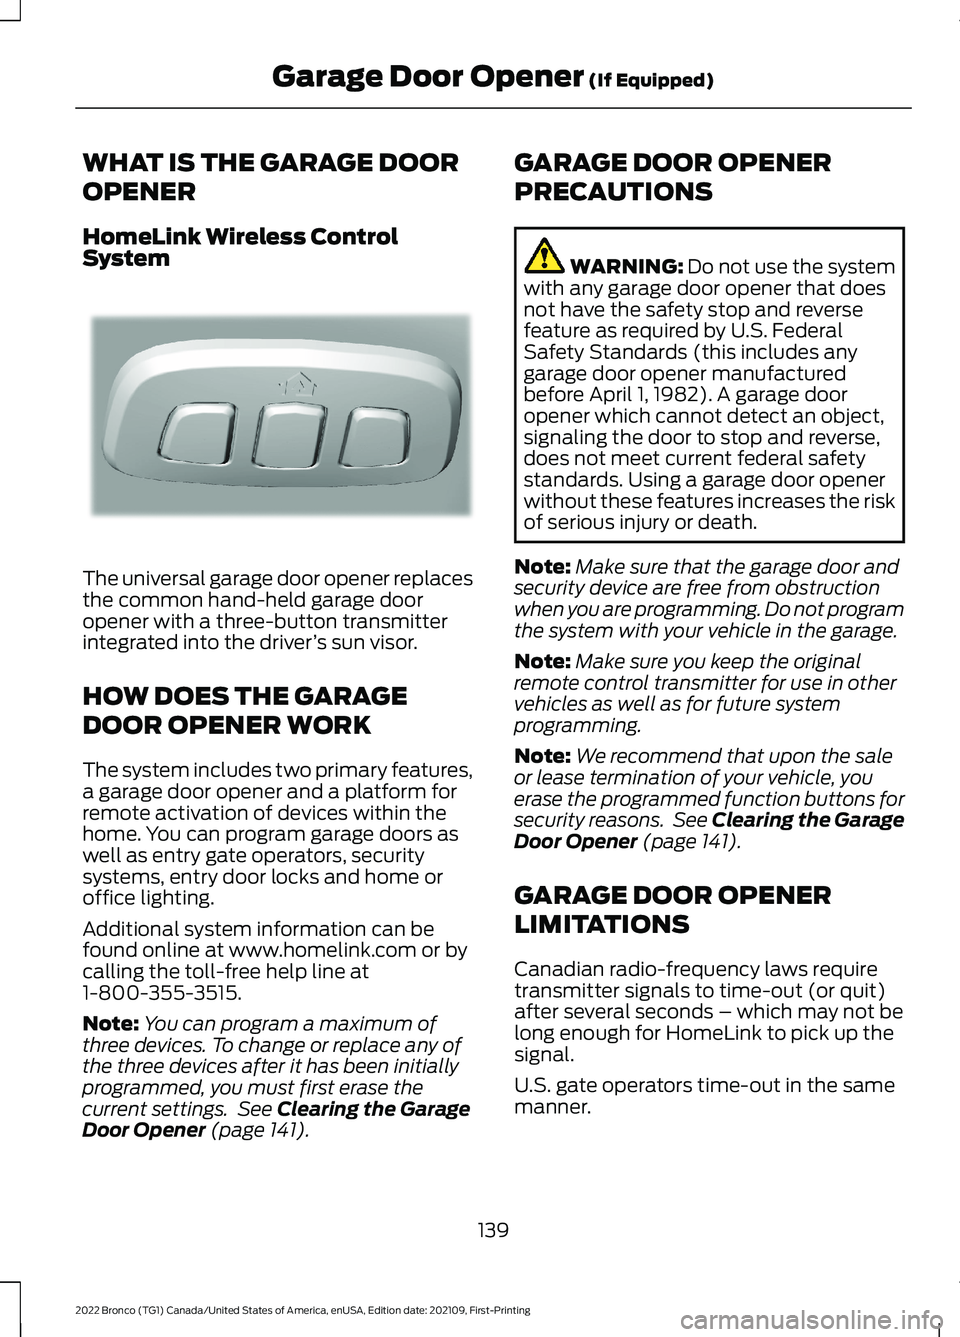 FORD BRONCO 2022 Owners Guide WHAT IS THE GARAGE DOOR
OPENER
HomeLink Wireless ControlSystem
The universal garage door opener replacesthe common hand-held garage dooropener with a three-button transmitterintegrated into the driver